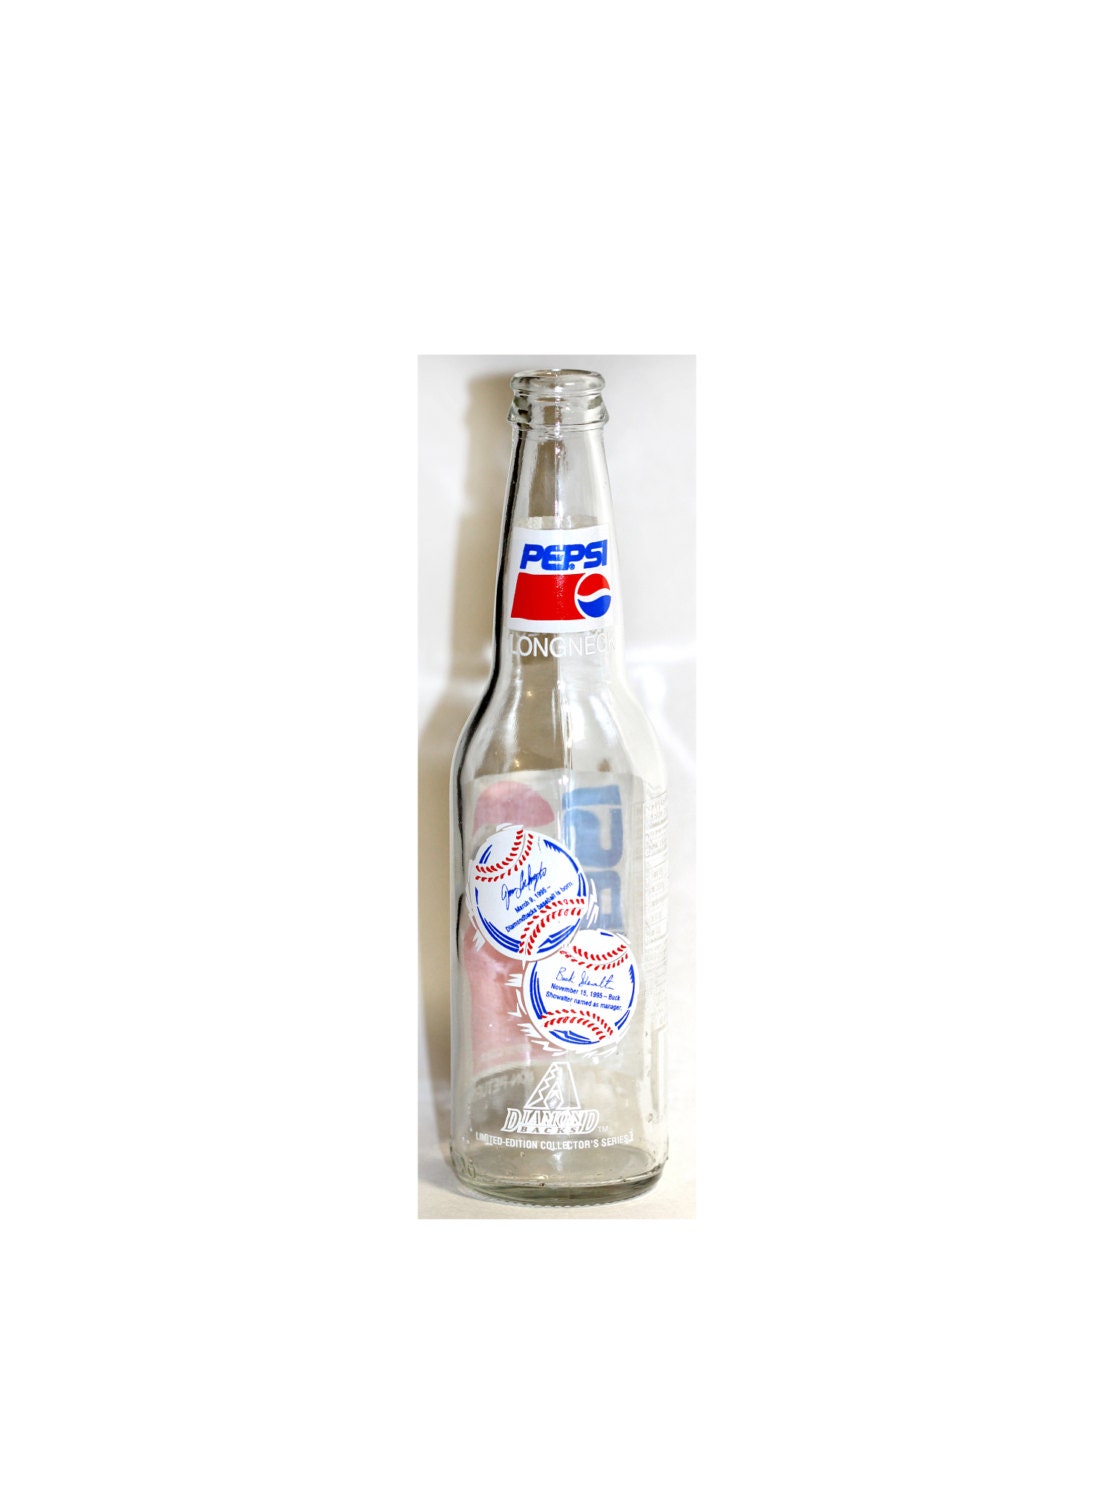 Are the old glass Pepsi bottles valuable?